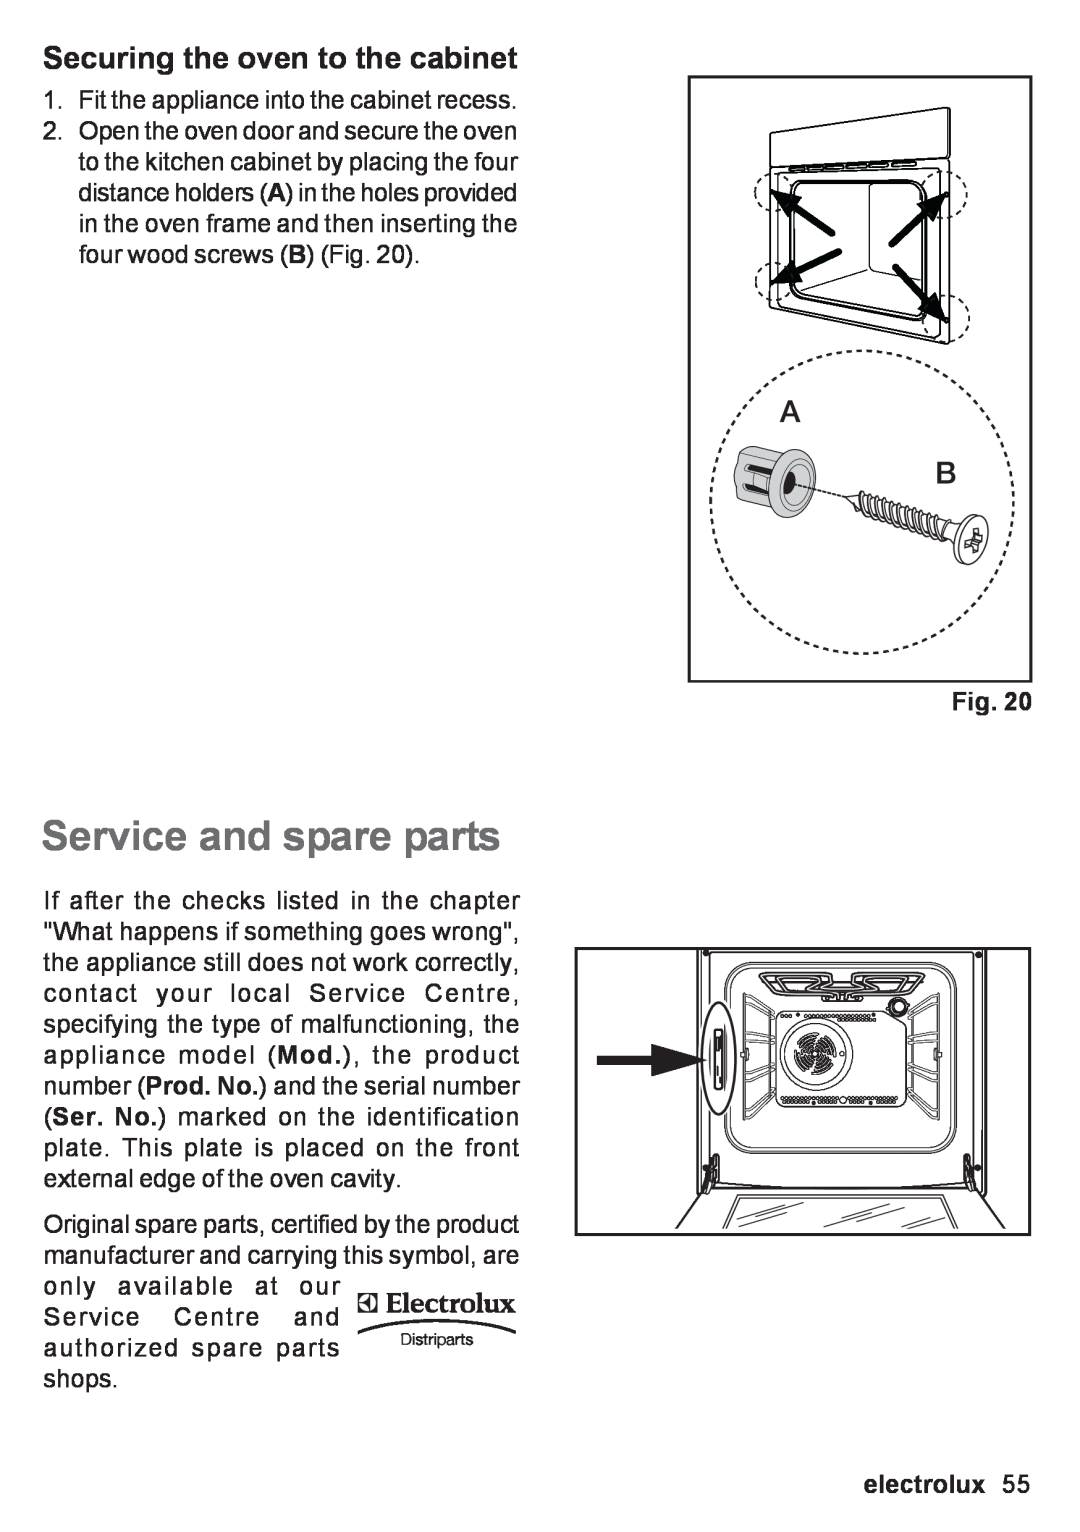 Electrolux EOB 53003 user manual Service and spare parts, Securing the oven to the cabinet, electrolux 